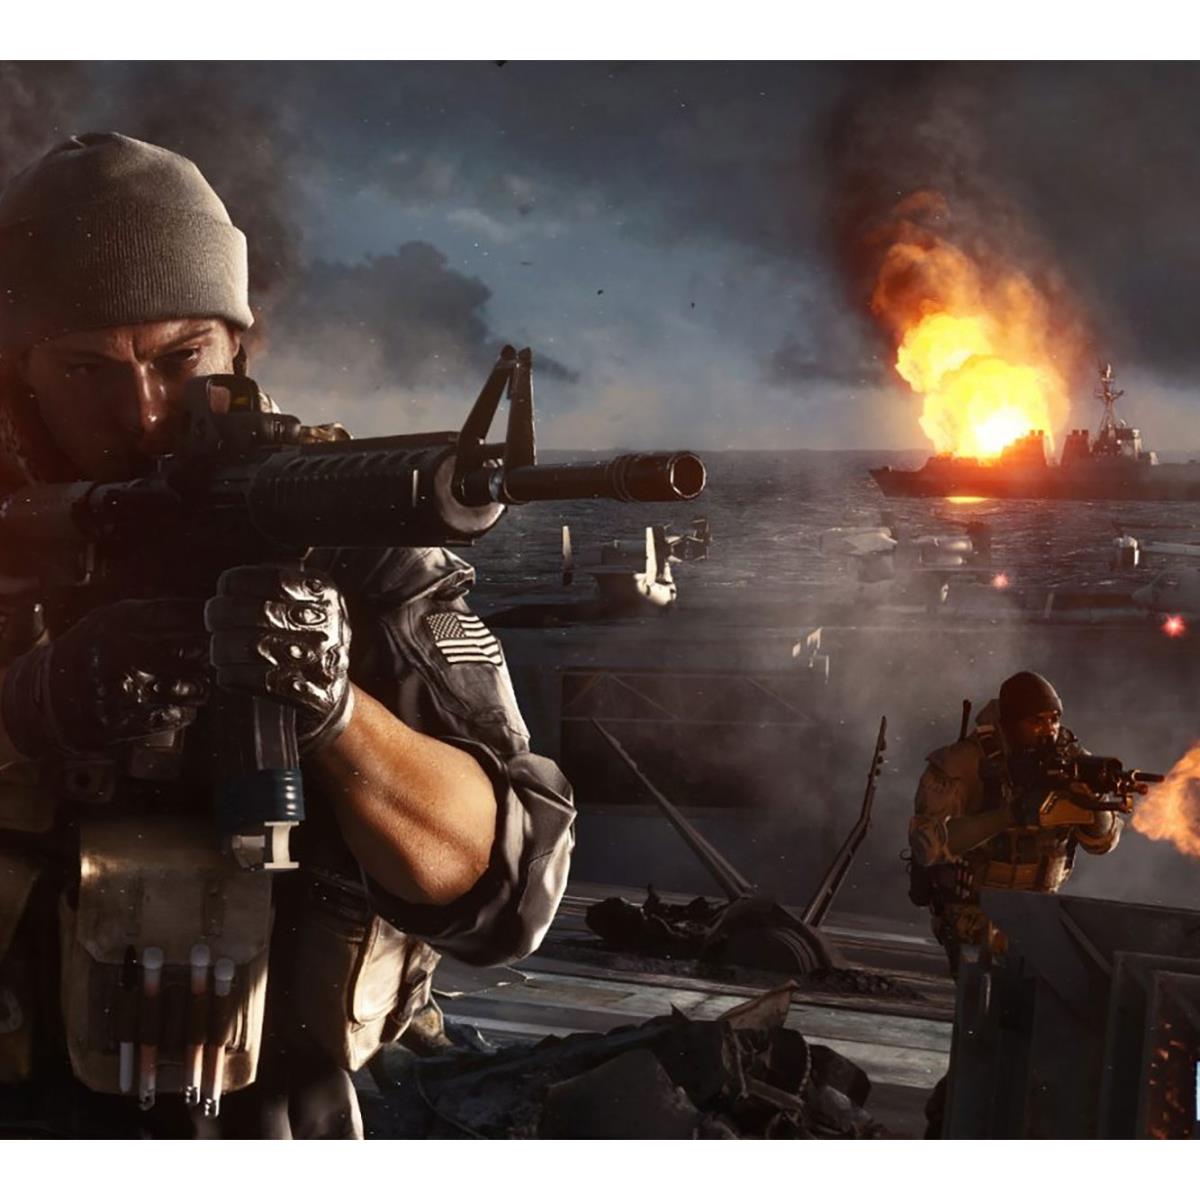 Battlefield 4' will have free download as part of their 'Road to